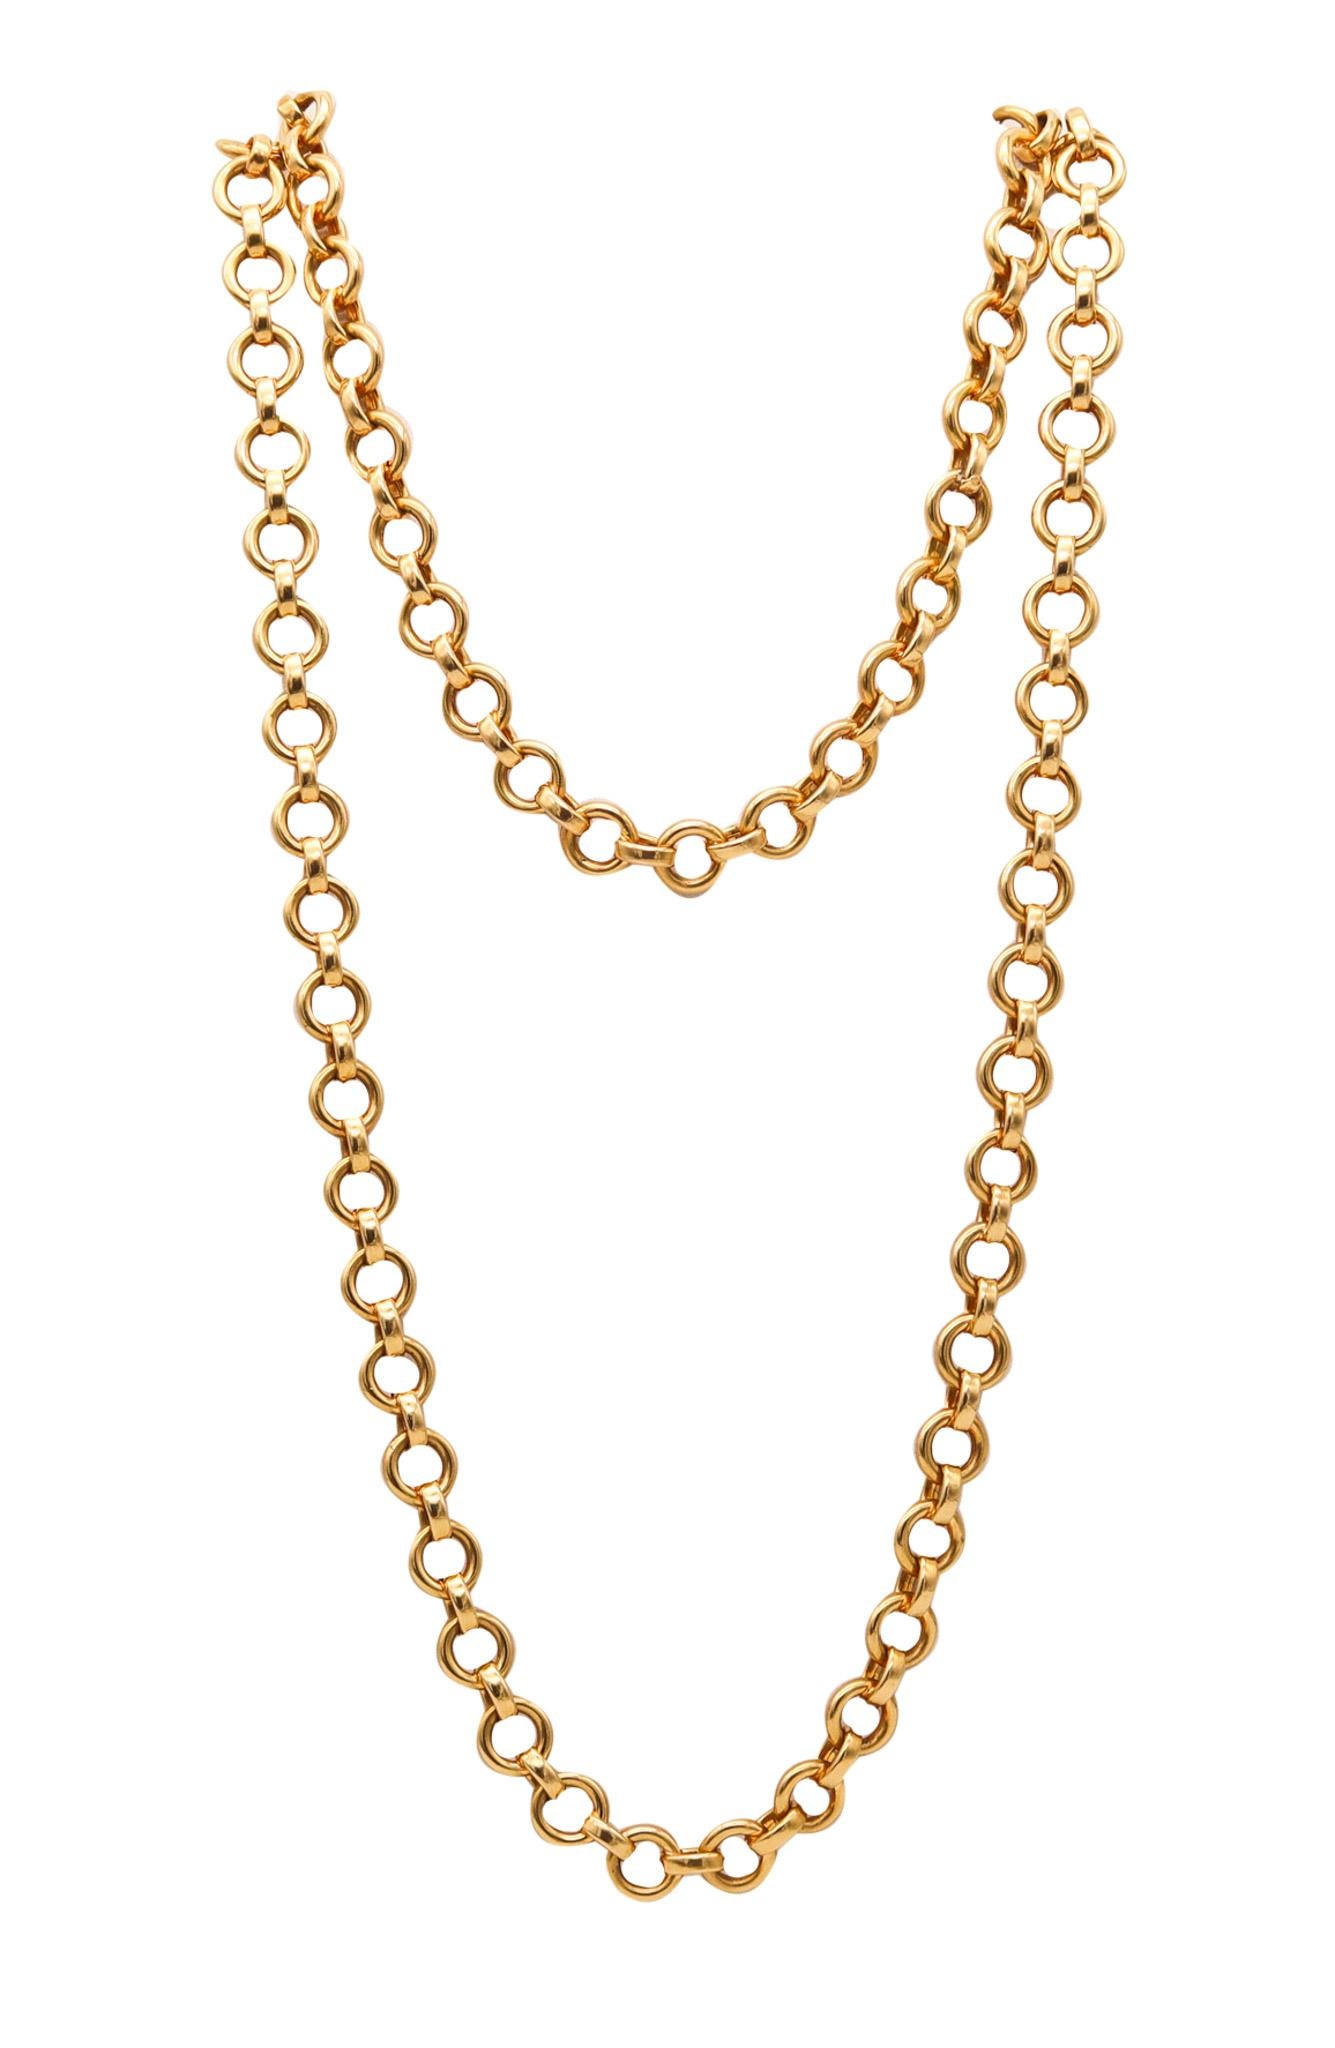 A long chain designed by Bruno Dal Lago in Vicenza.

A modernist long chain, created in Vicenza Italy at the jewelry atelier of Bruno Dal Lago, back in the 1970. This beautiful links chain has been crafted in yellow gold of 18 karats with polished